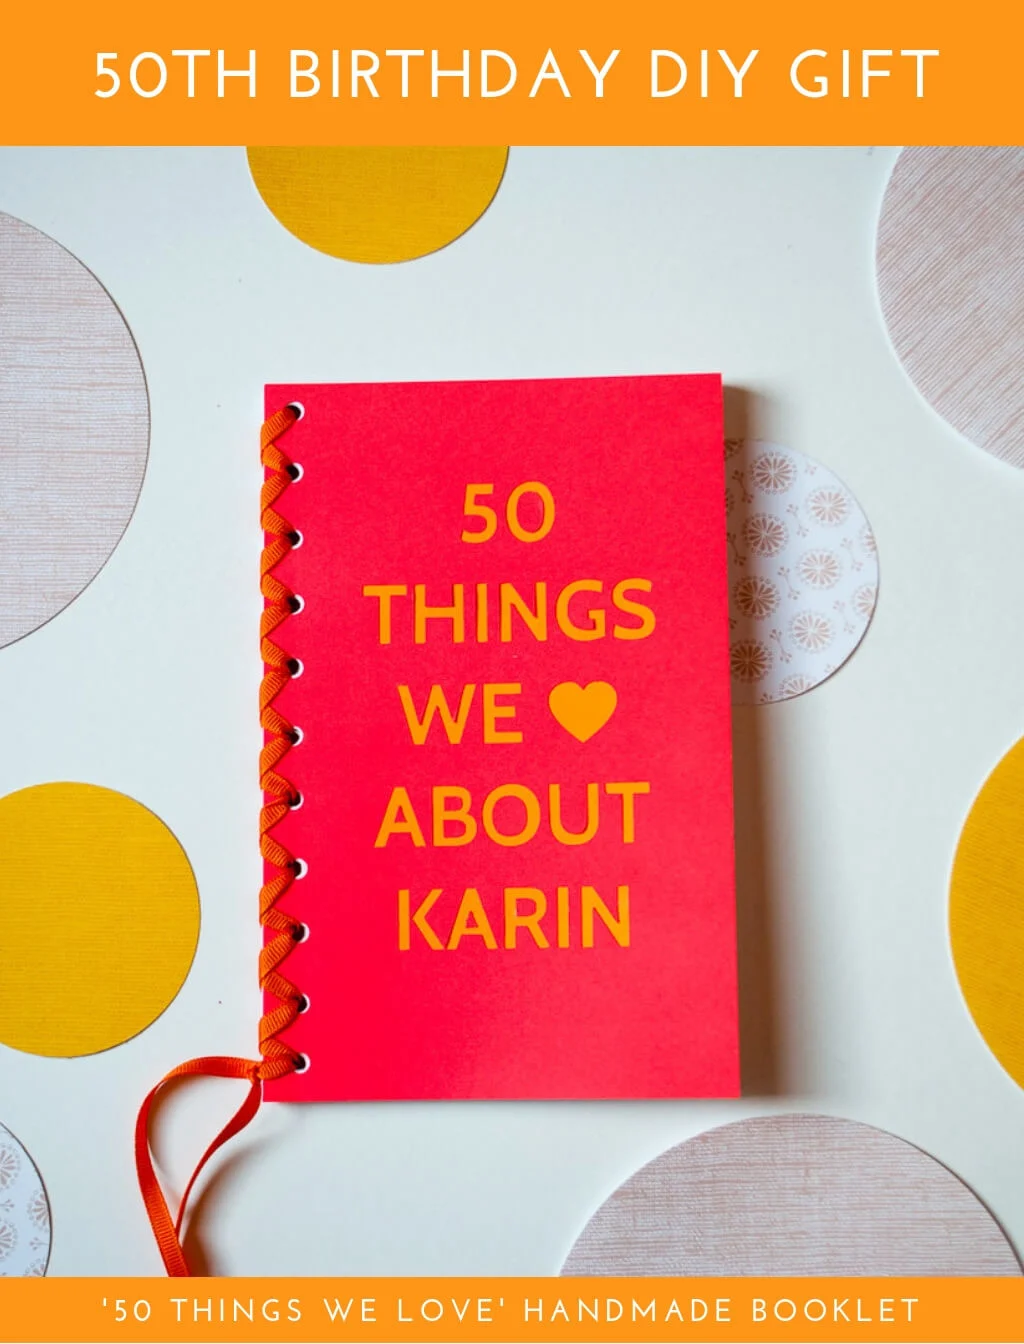 50 Things We Love About You Book 50th Birthday Diy Gift Idea Merriment Design